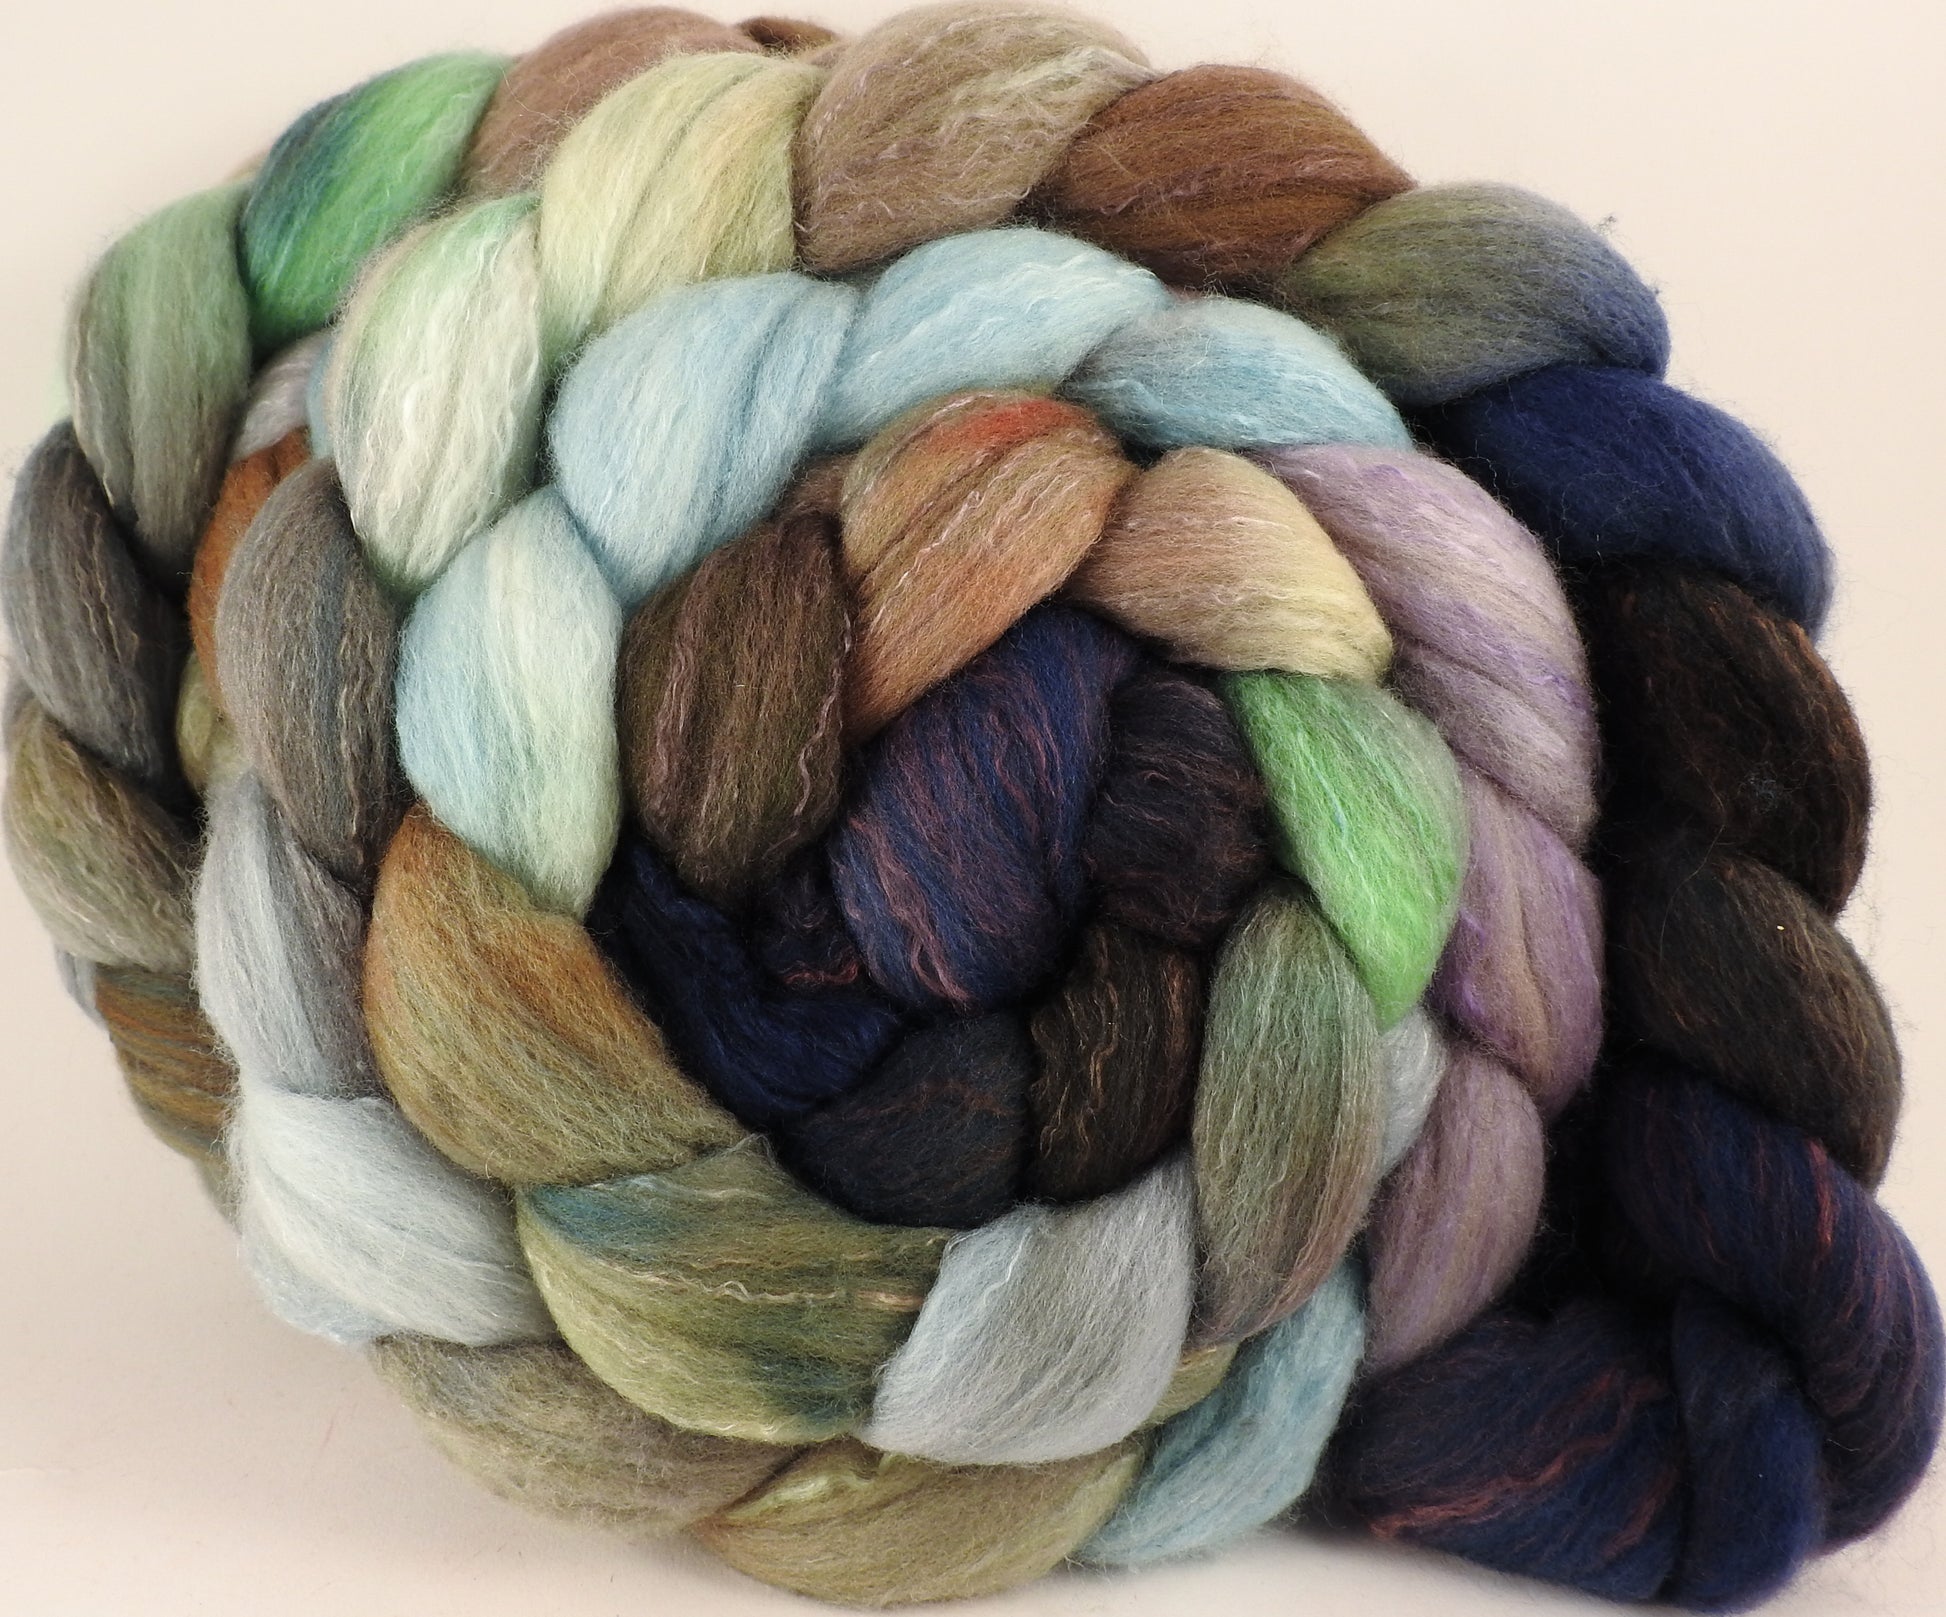 Hand dyed top for spinning - Downpour - (5.2 oz) Organic Polwarth / Tussah silk (80/20) - Inglenook Fibers